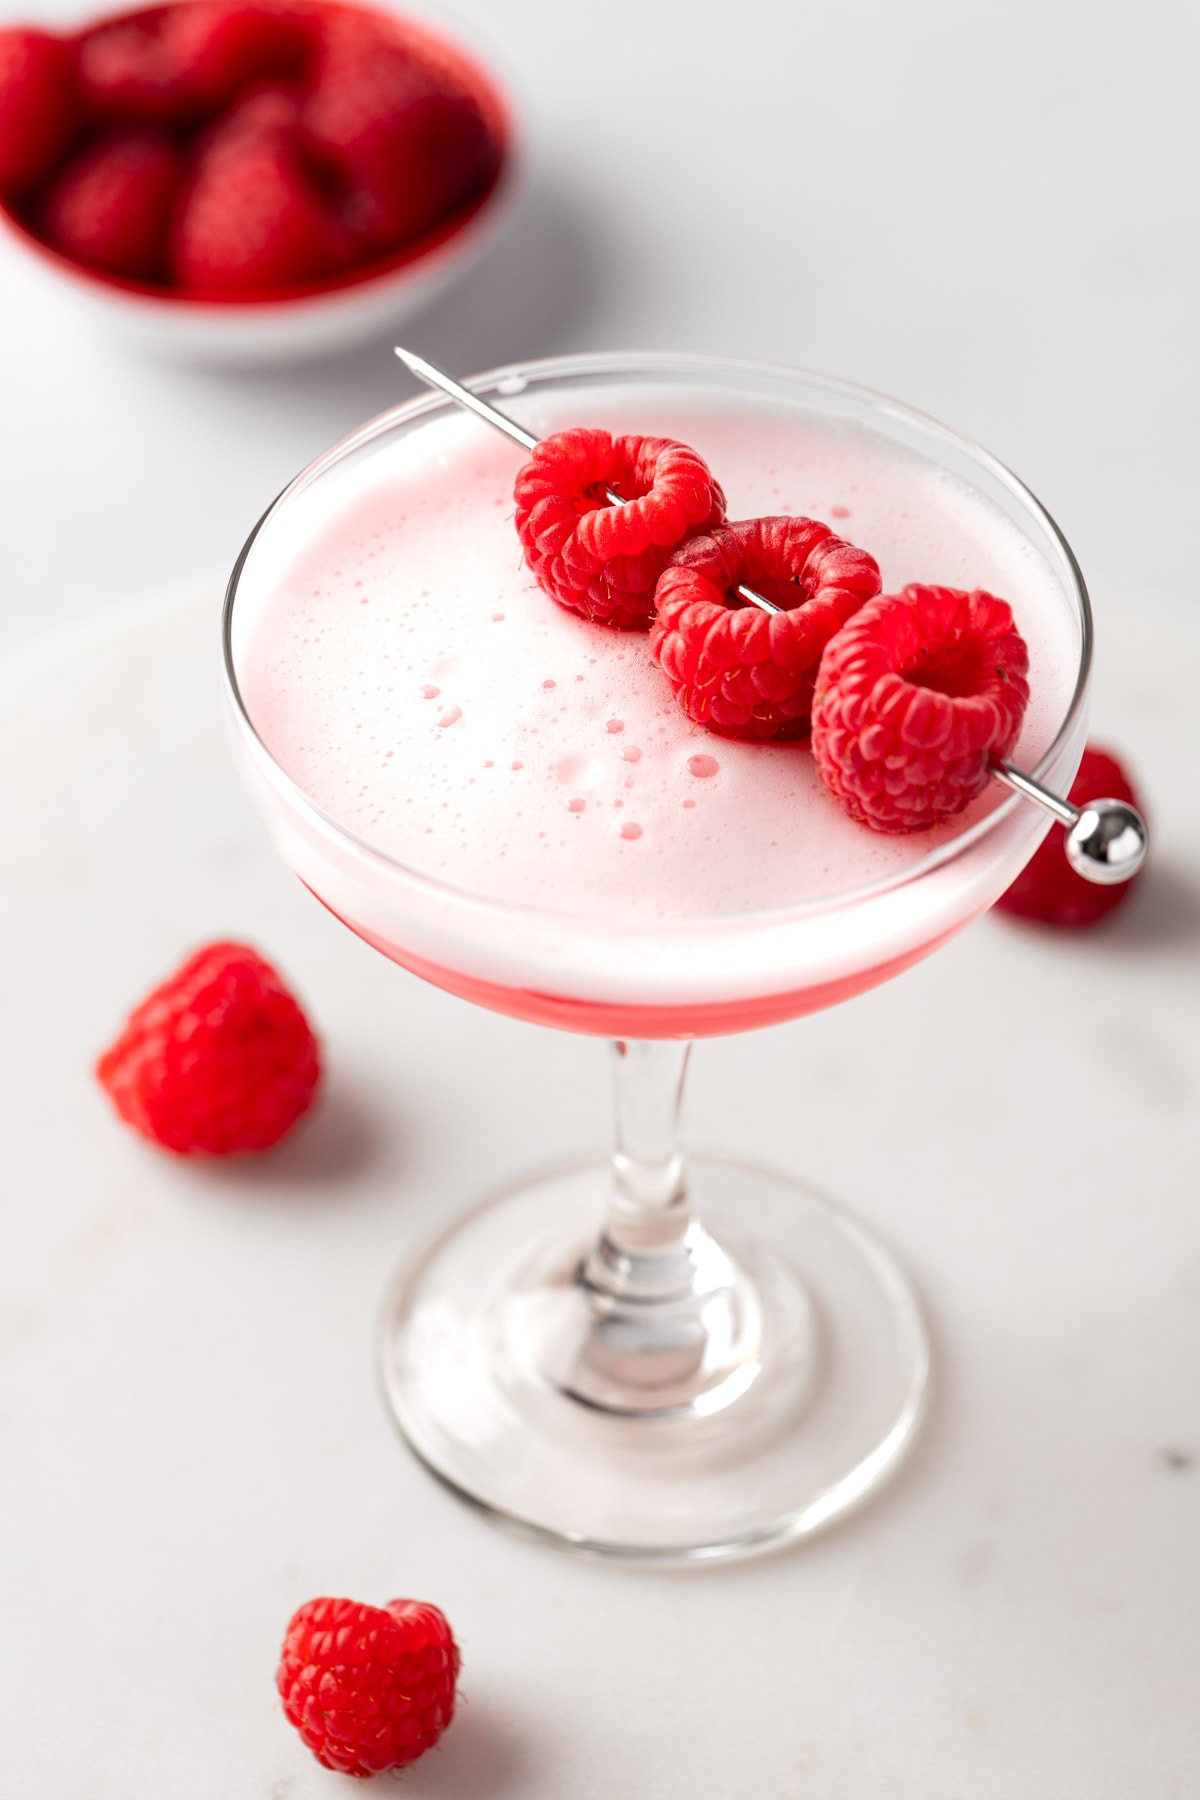 A raspberry gin sour served in a coupe glass, garnished with fresh raspberries.